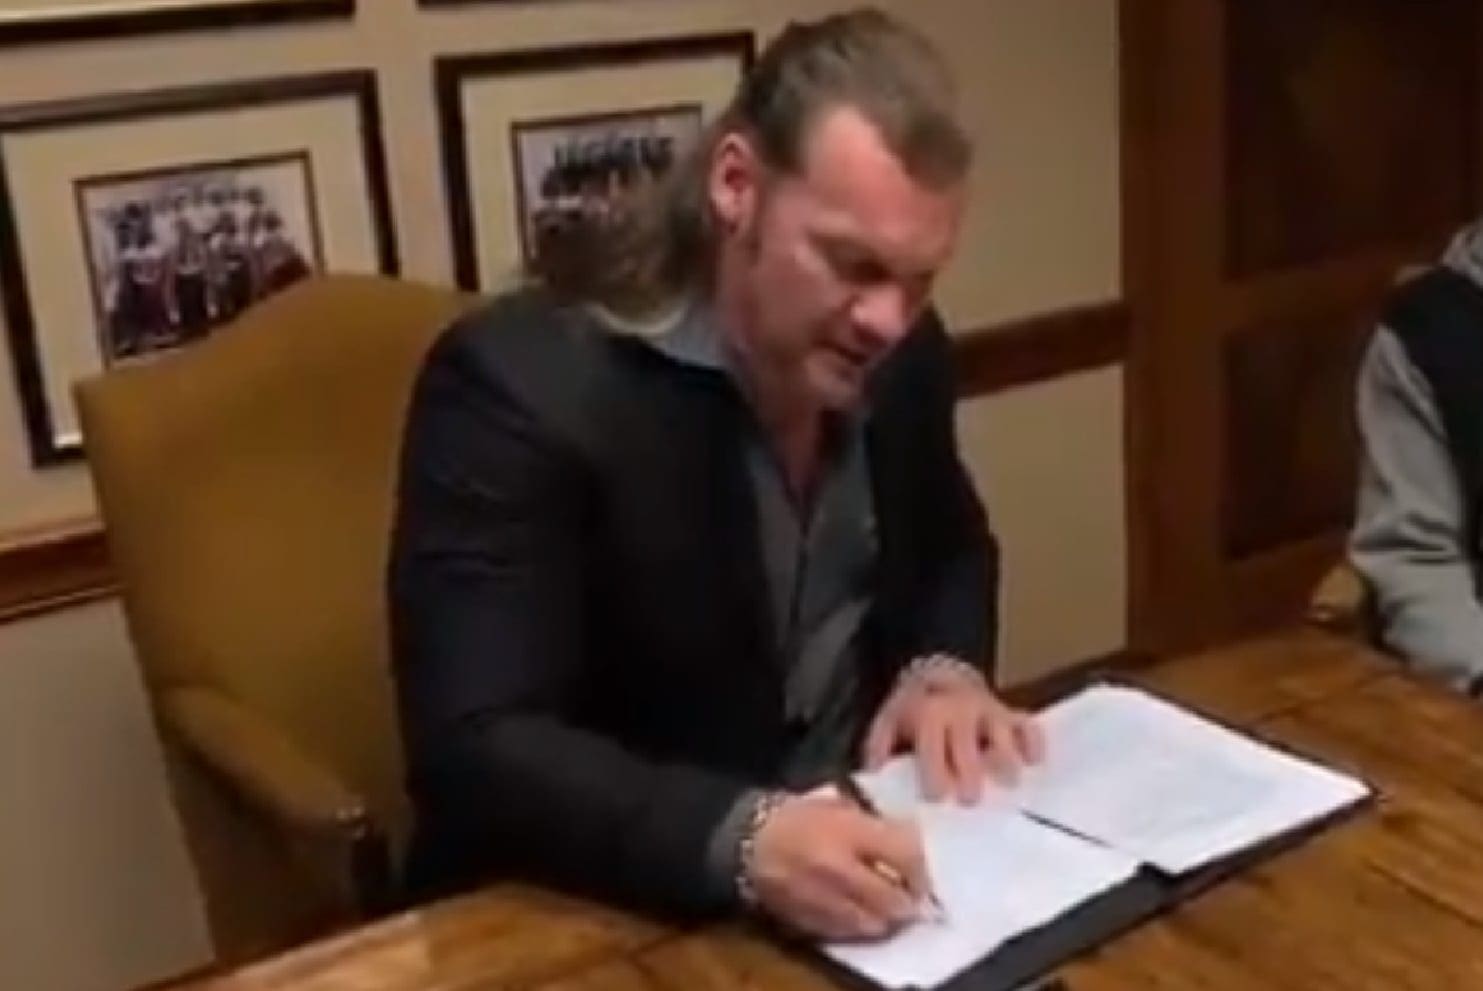 Watch Chris Jericho Sign His All Elite Wrestling Contract